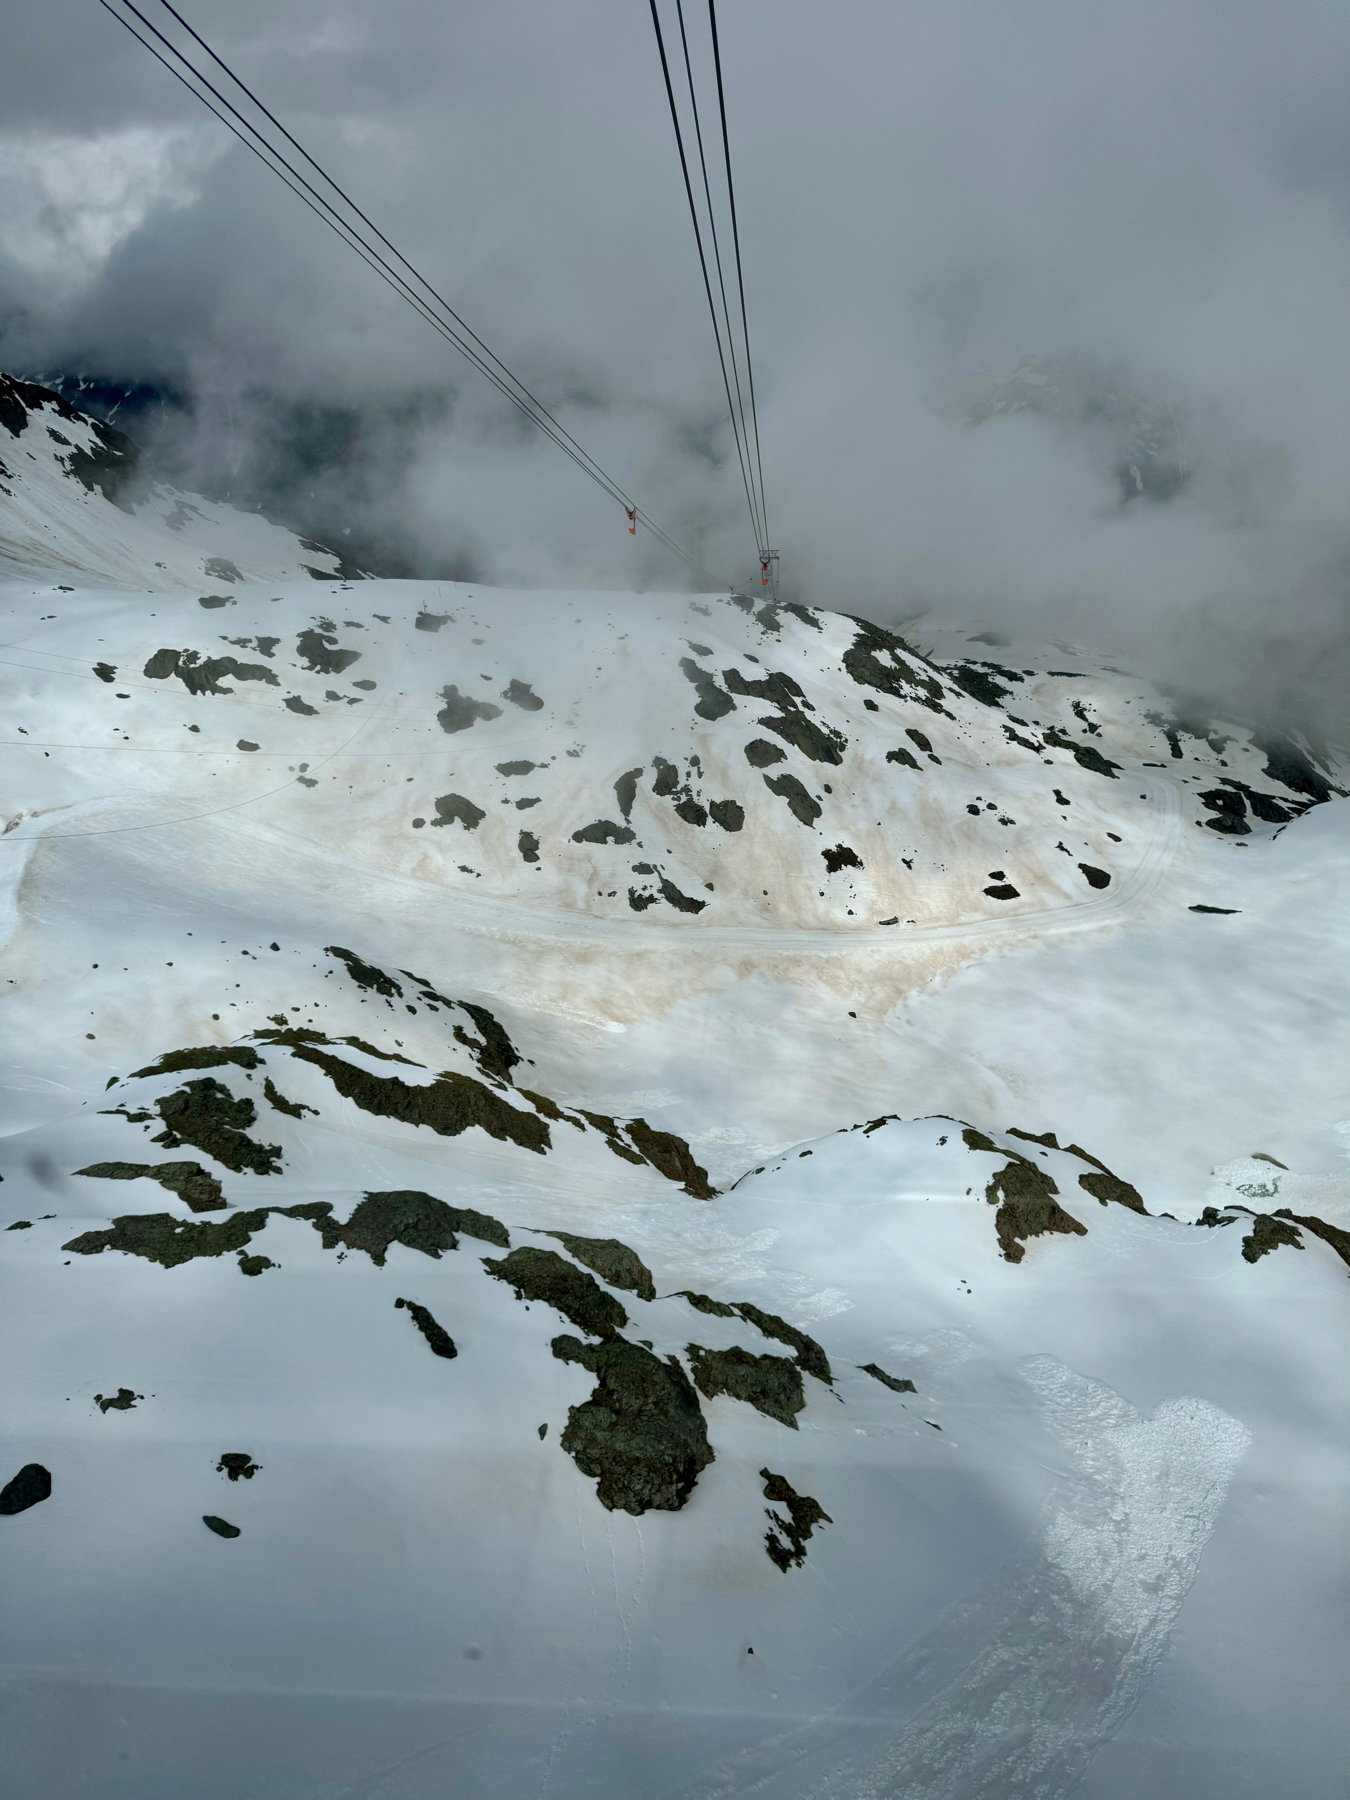 Aerial view of a snowy mountain landscape with cable car lines disappearing into a cloudy sky.